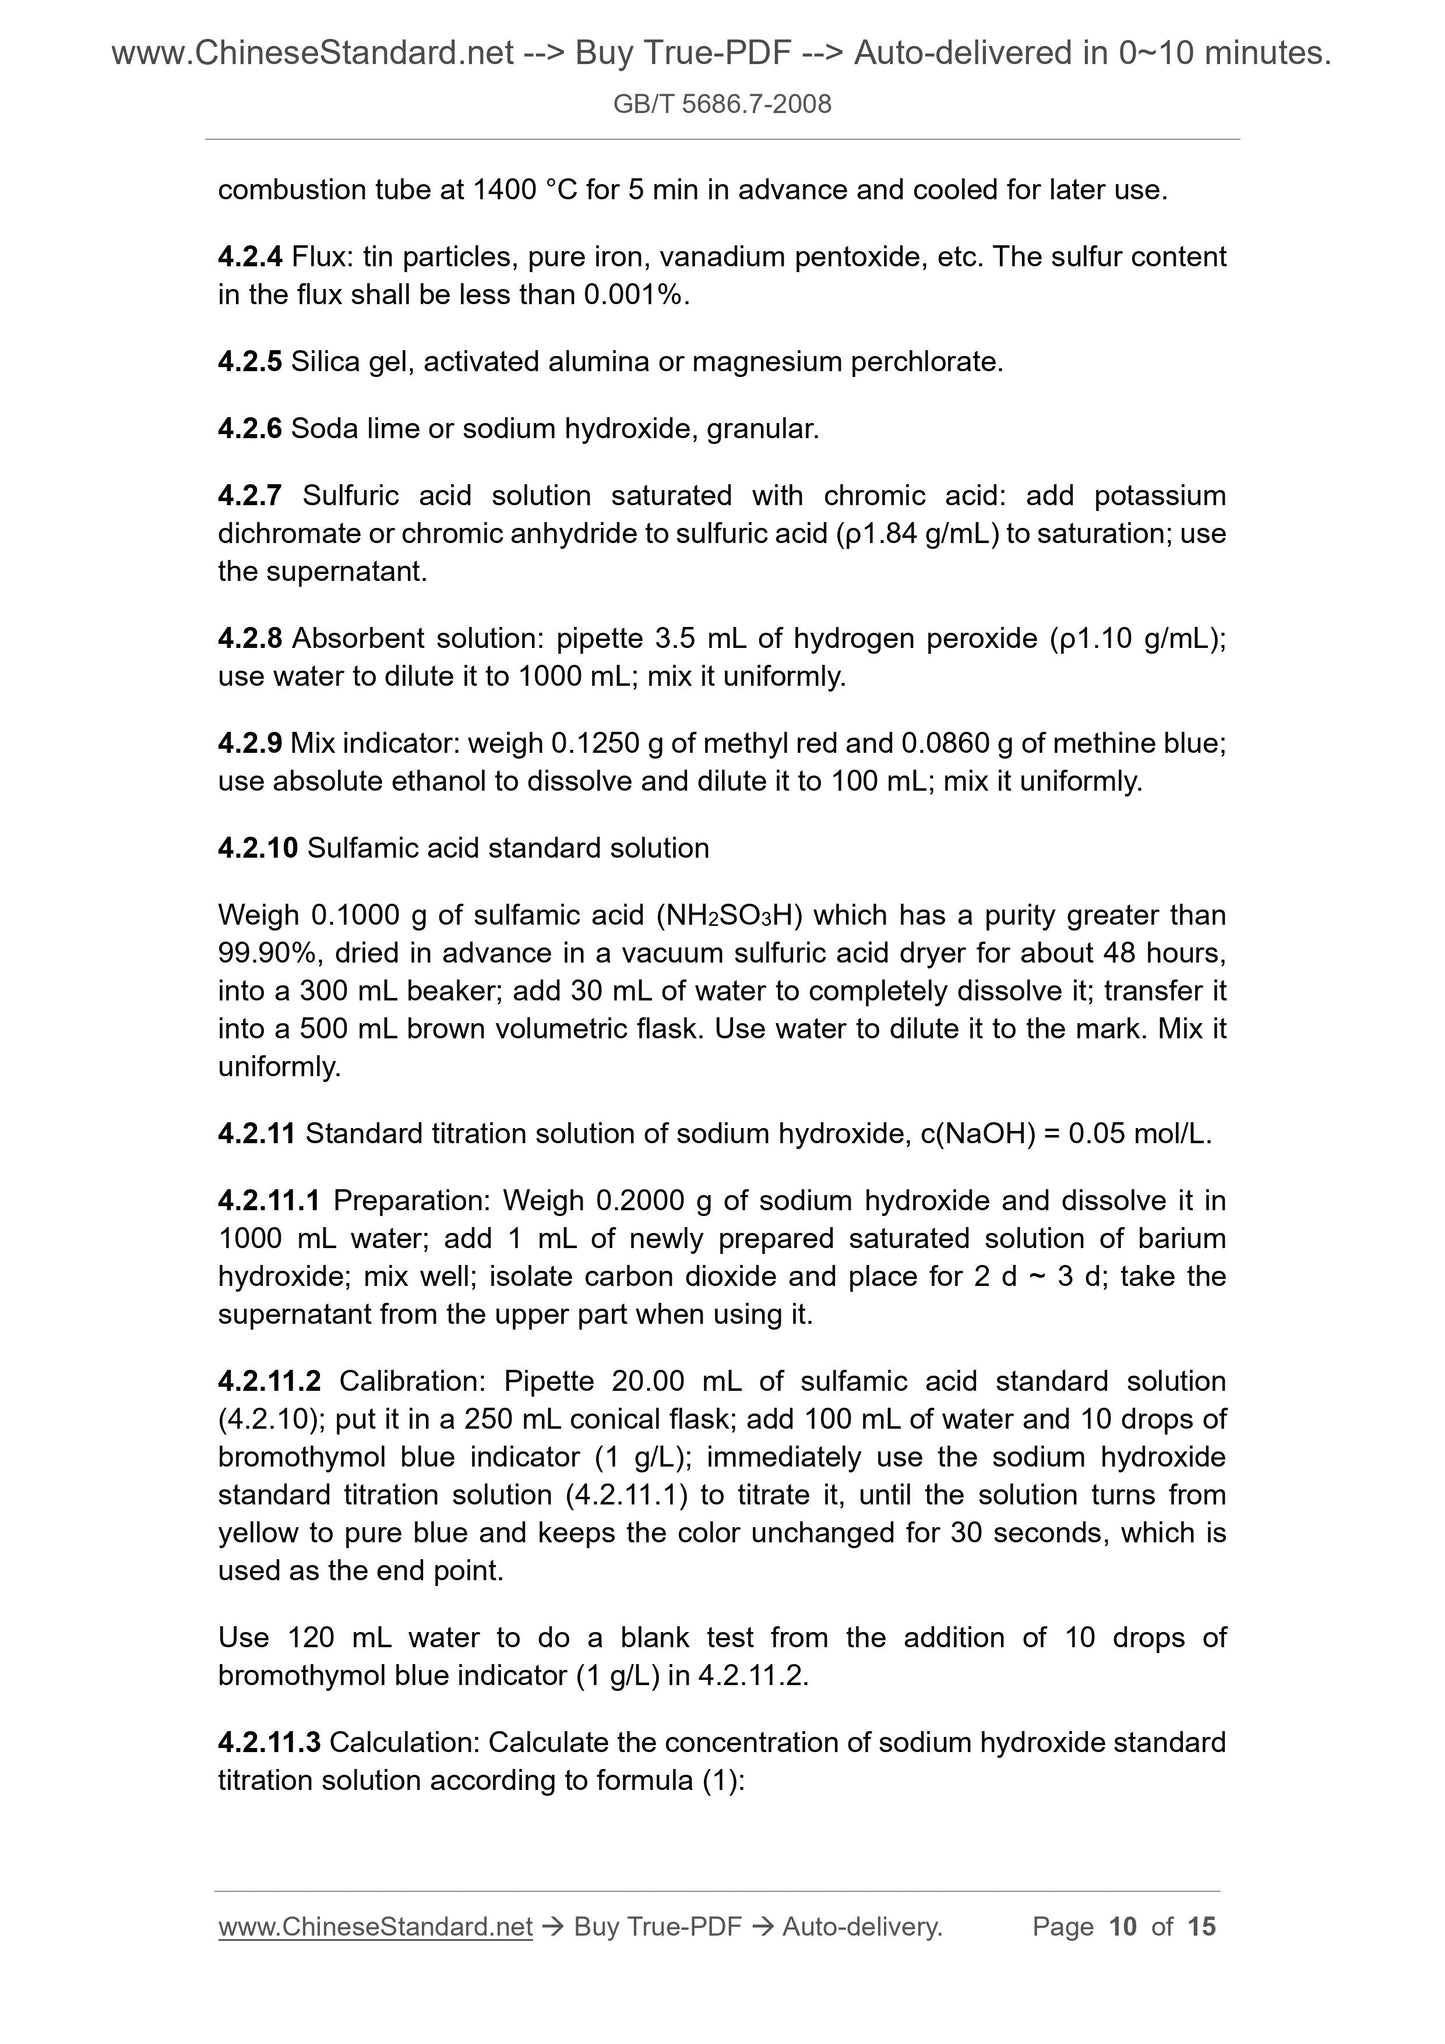 GB/T 5686.7-2008 Page 5